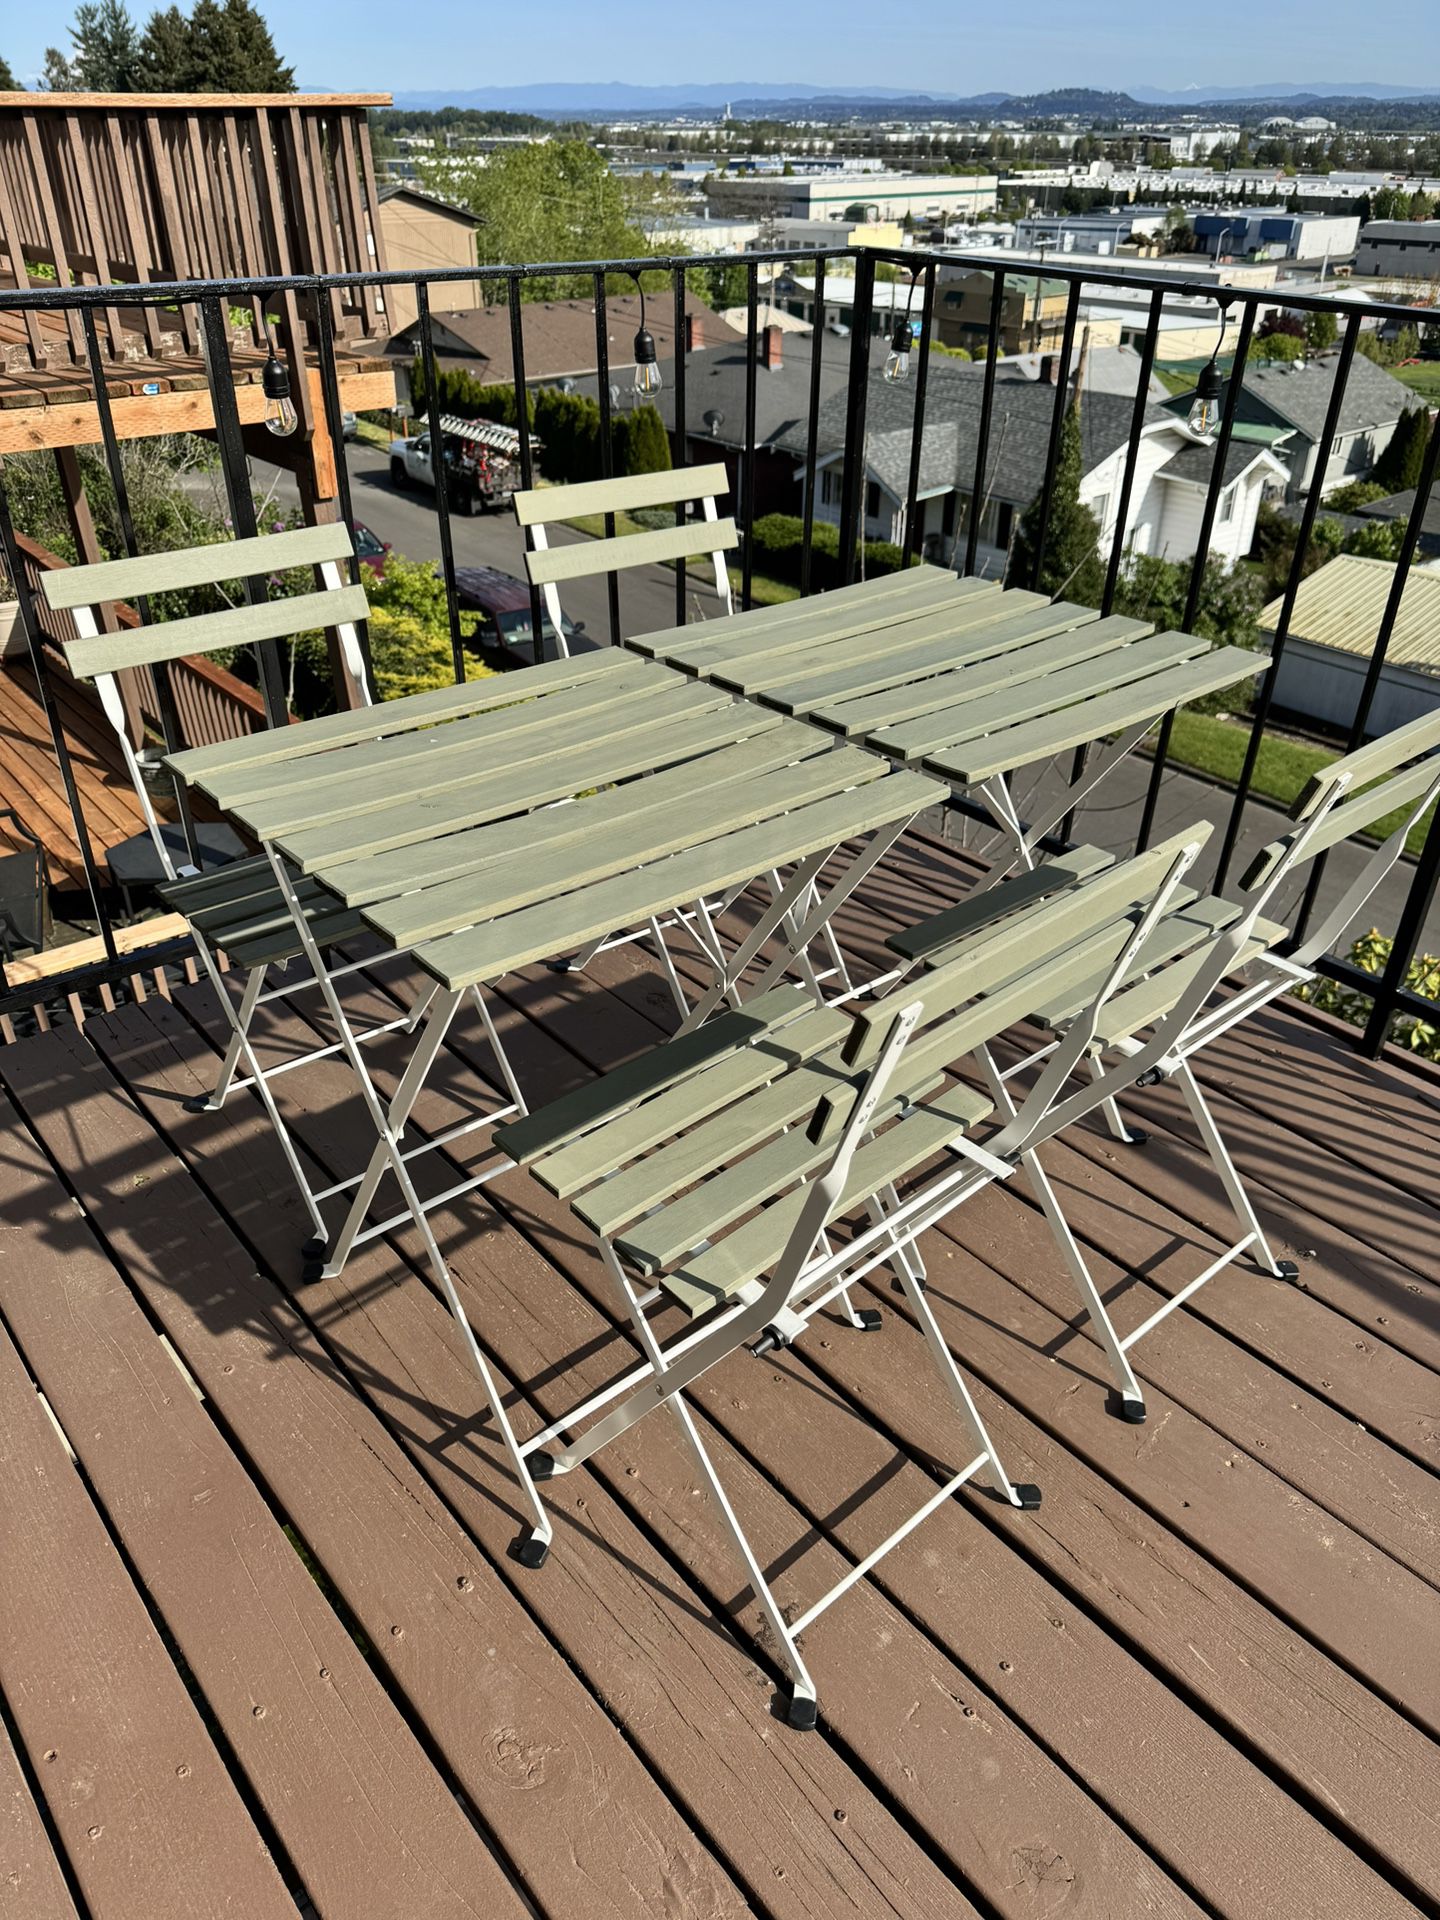 Porch Patio Bistro Chair And Table Sets 